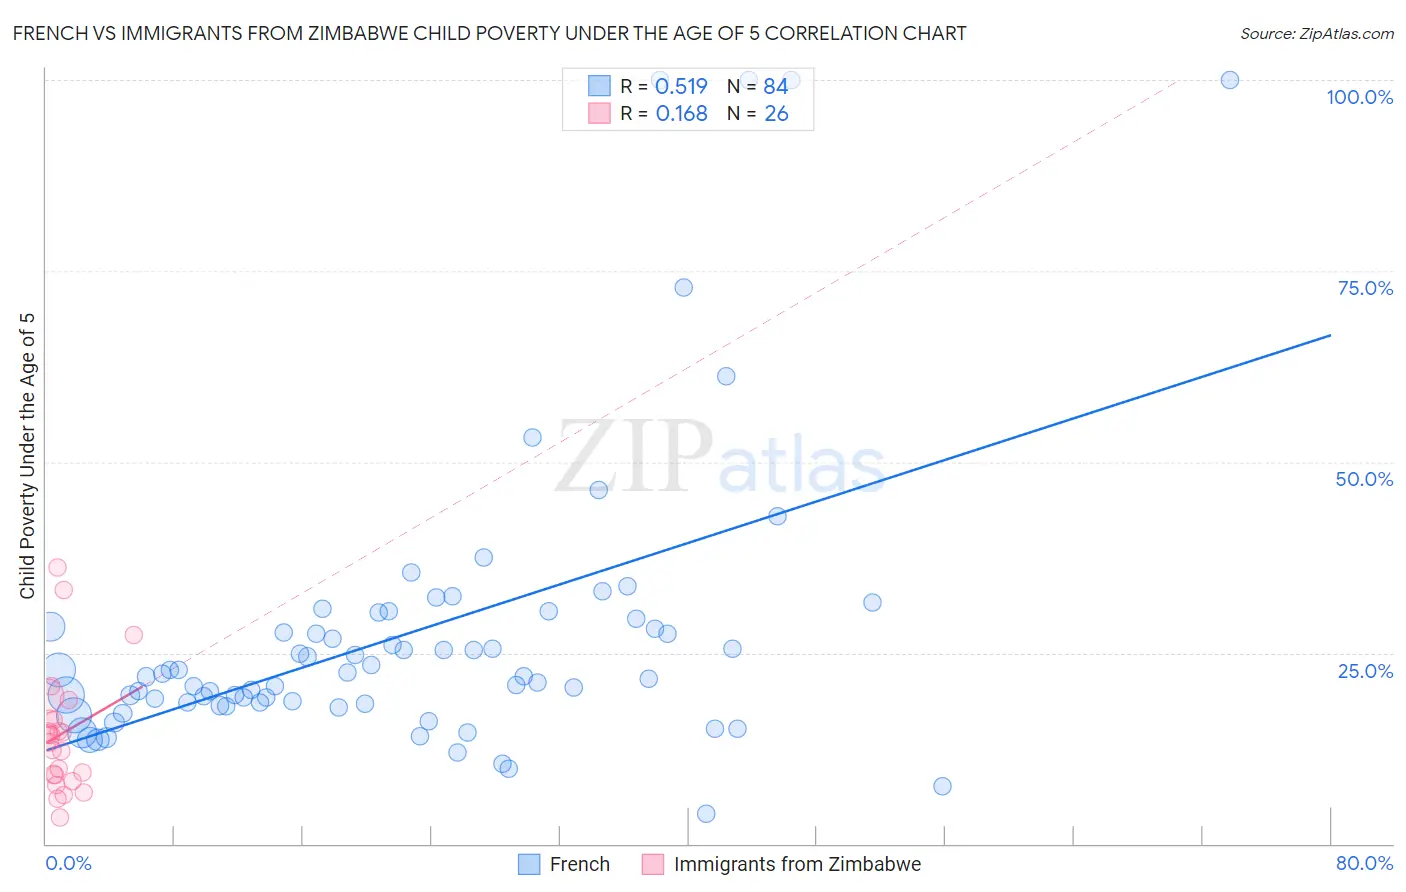 French vs Immigrants from Zimbabwe Child Poverty Under the Age of 5